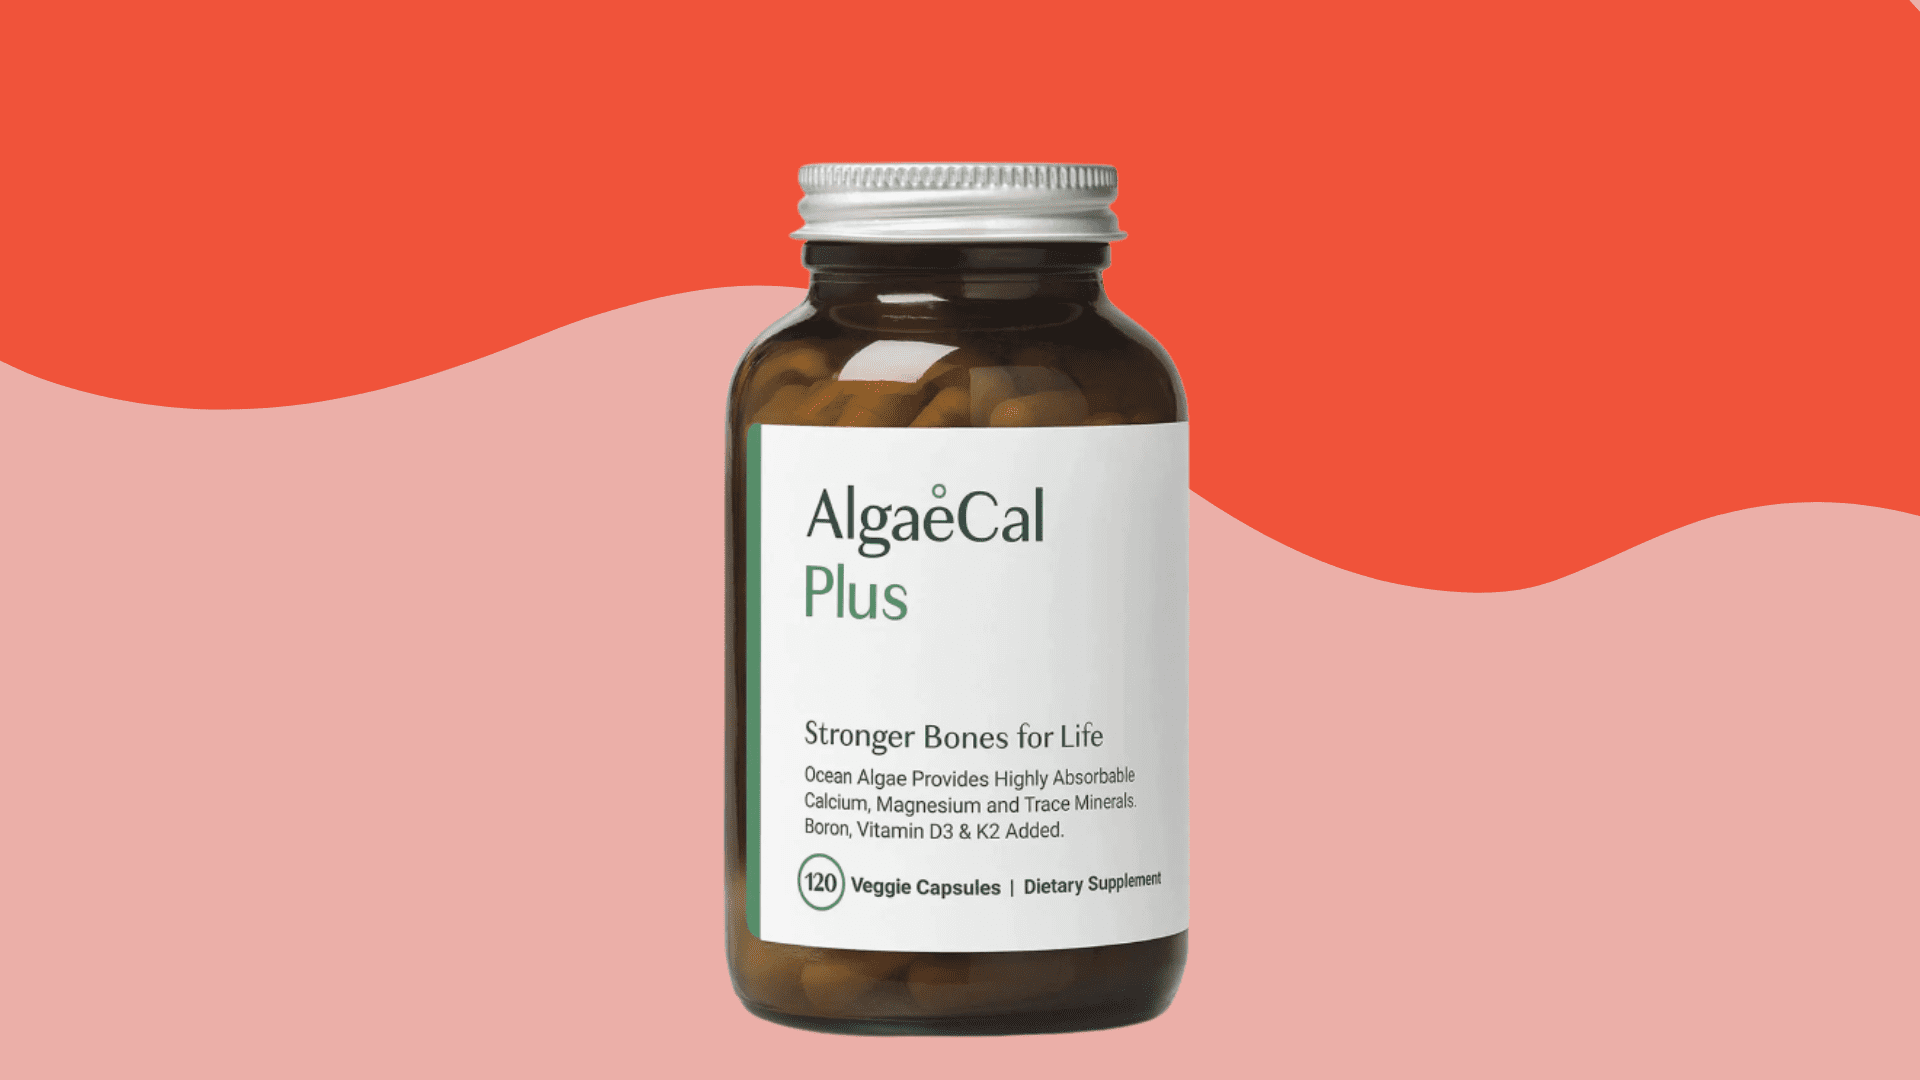 AlgaeCal Plus Joint Health Supplement in Center